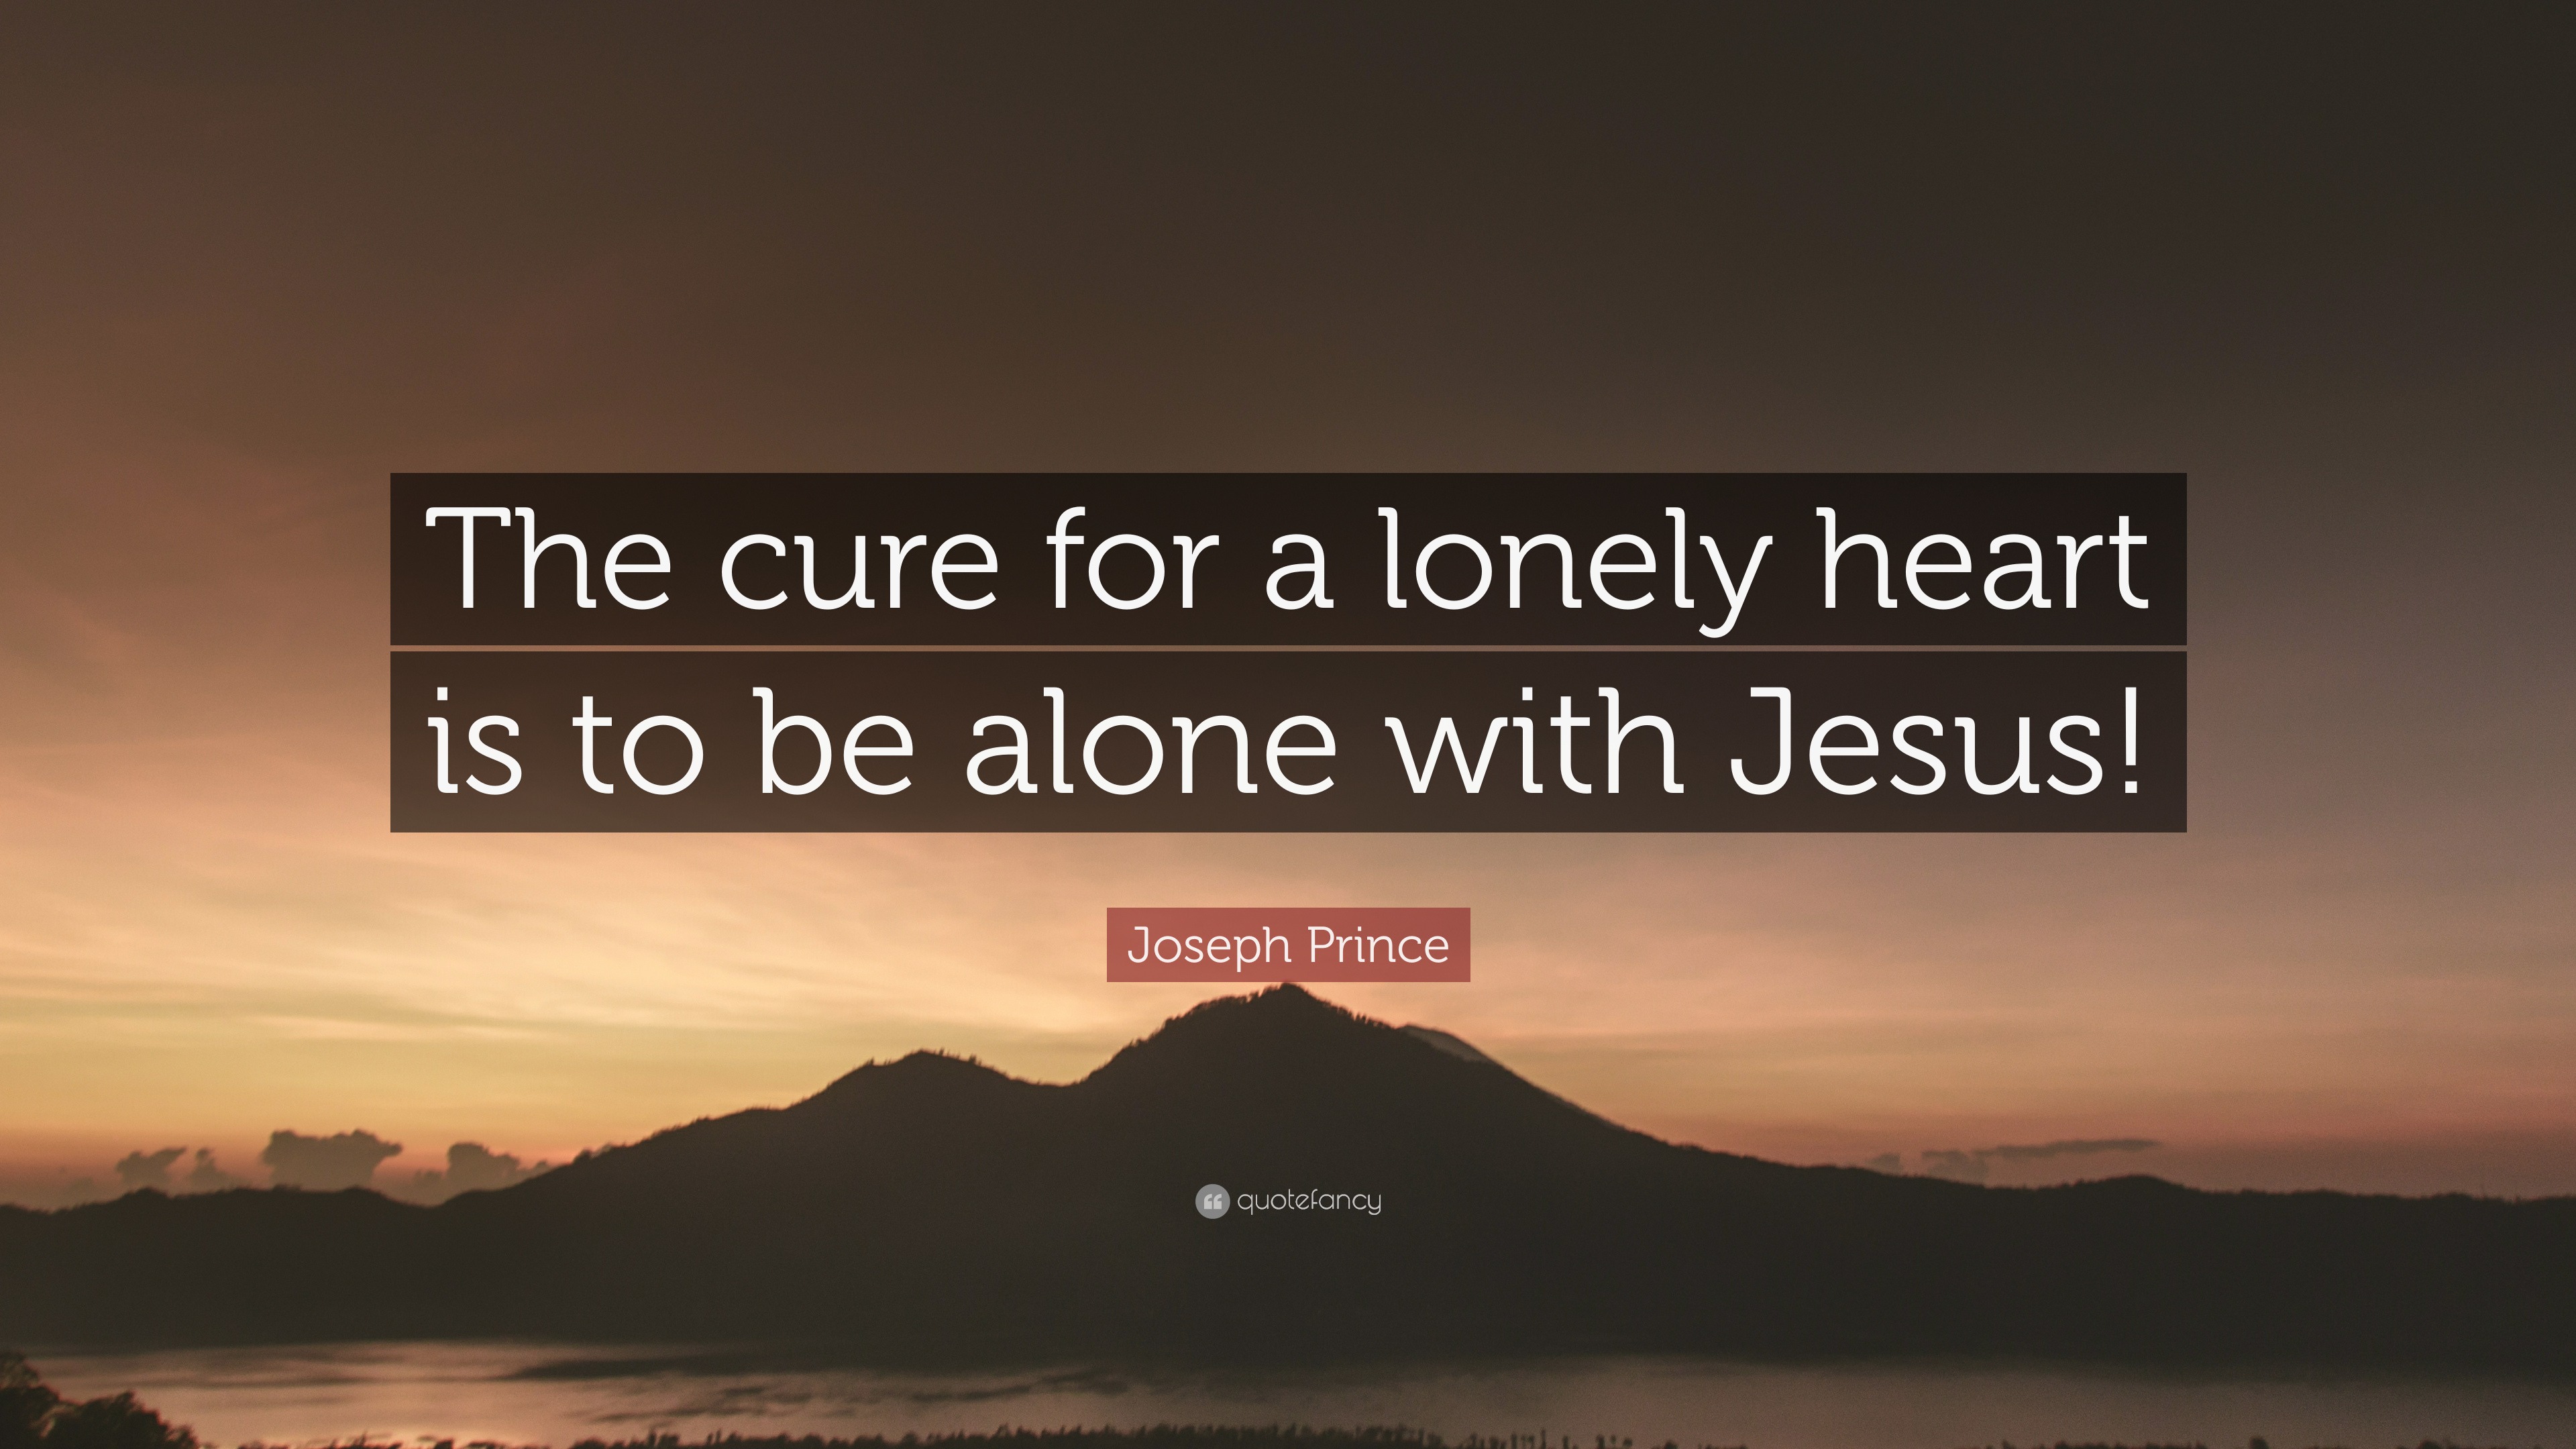 Joseph Prince Quote: “The cure for a lonely heart is to be alone with  Jesus!”